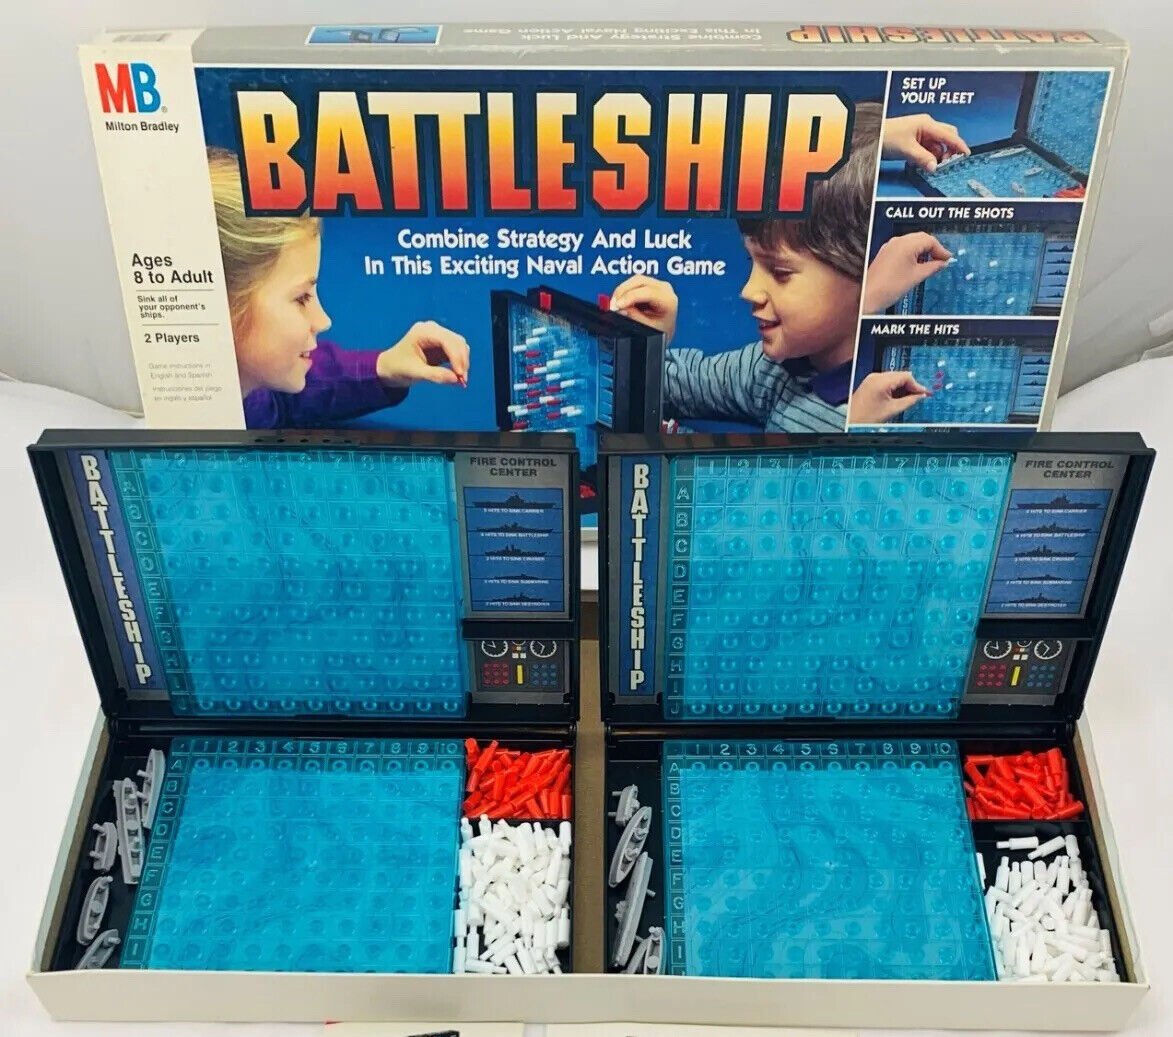 1981 Battleship Game by Milton Bradley Complete in Good Condition 